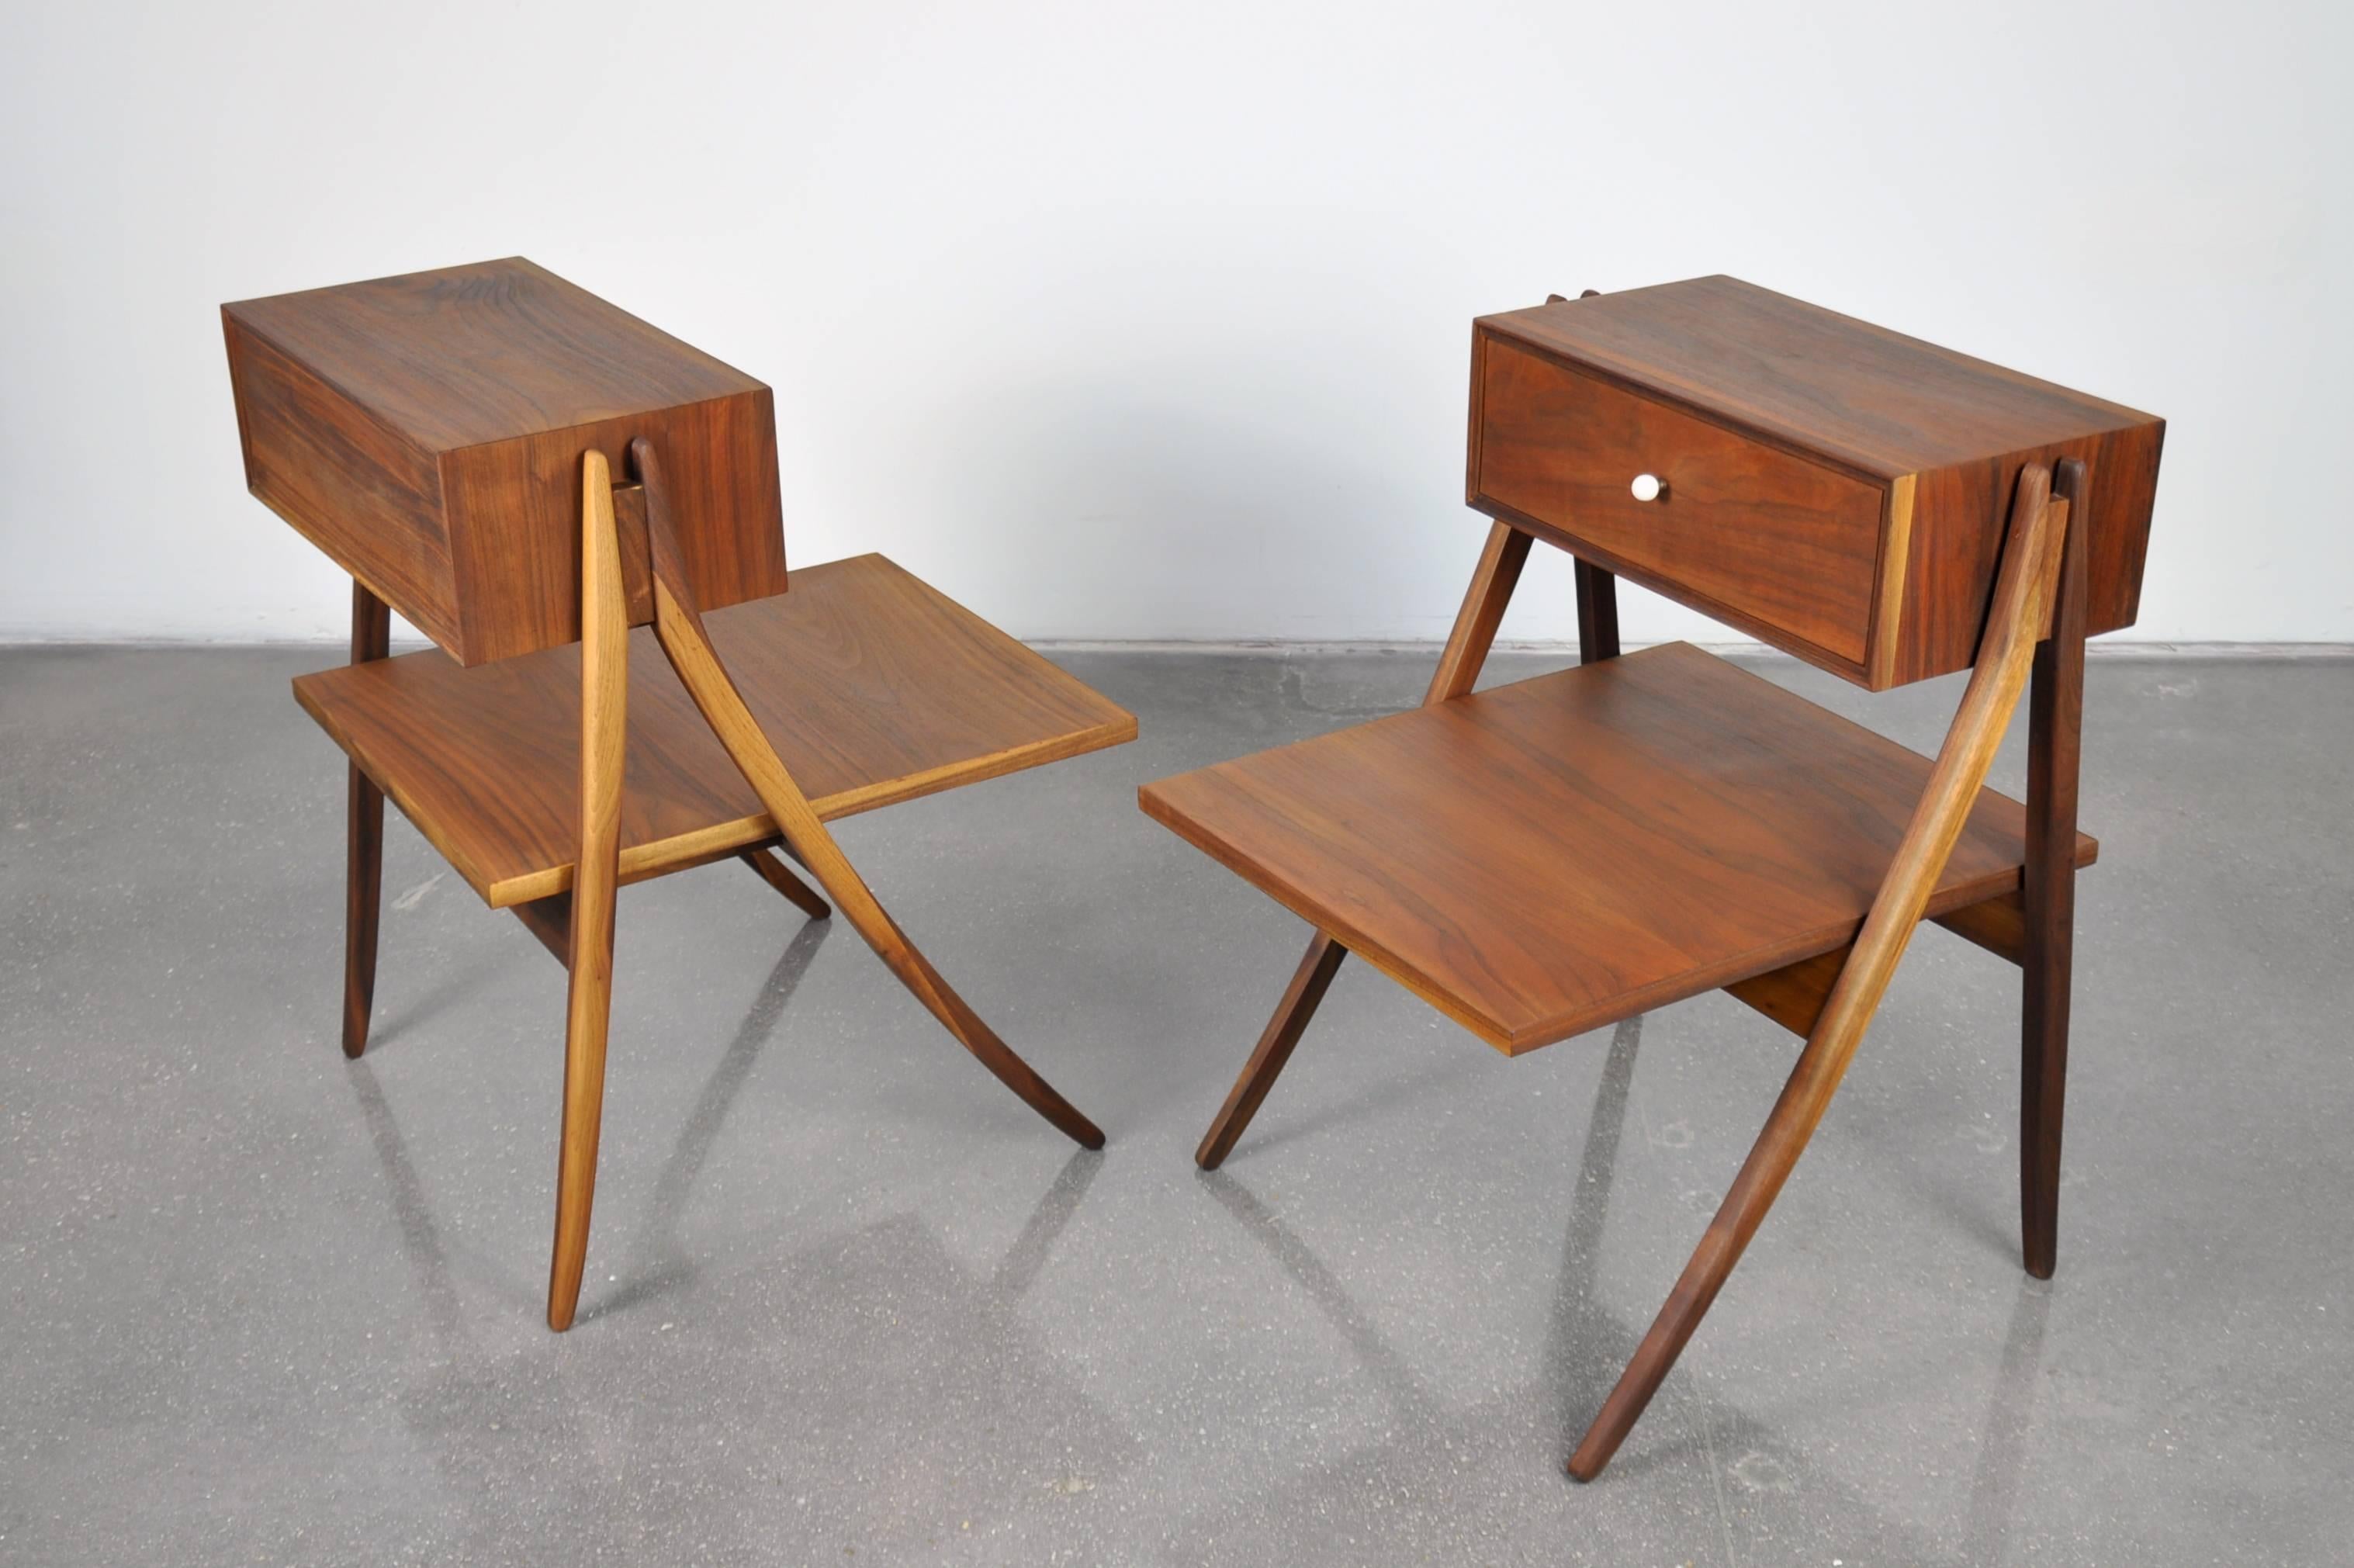 A superb pair of sculptural Mid-Century Modern walnut nightstands designed in the 1950s by Kipp Stewart and Steward MacDougall for the Declaration line by Drexel. The striking two-tier bedside tables feature a floating single drawer and a